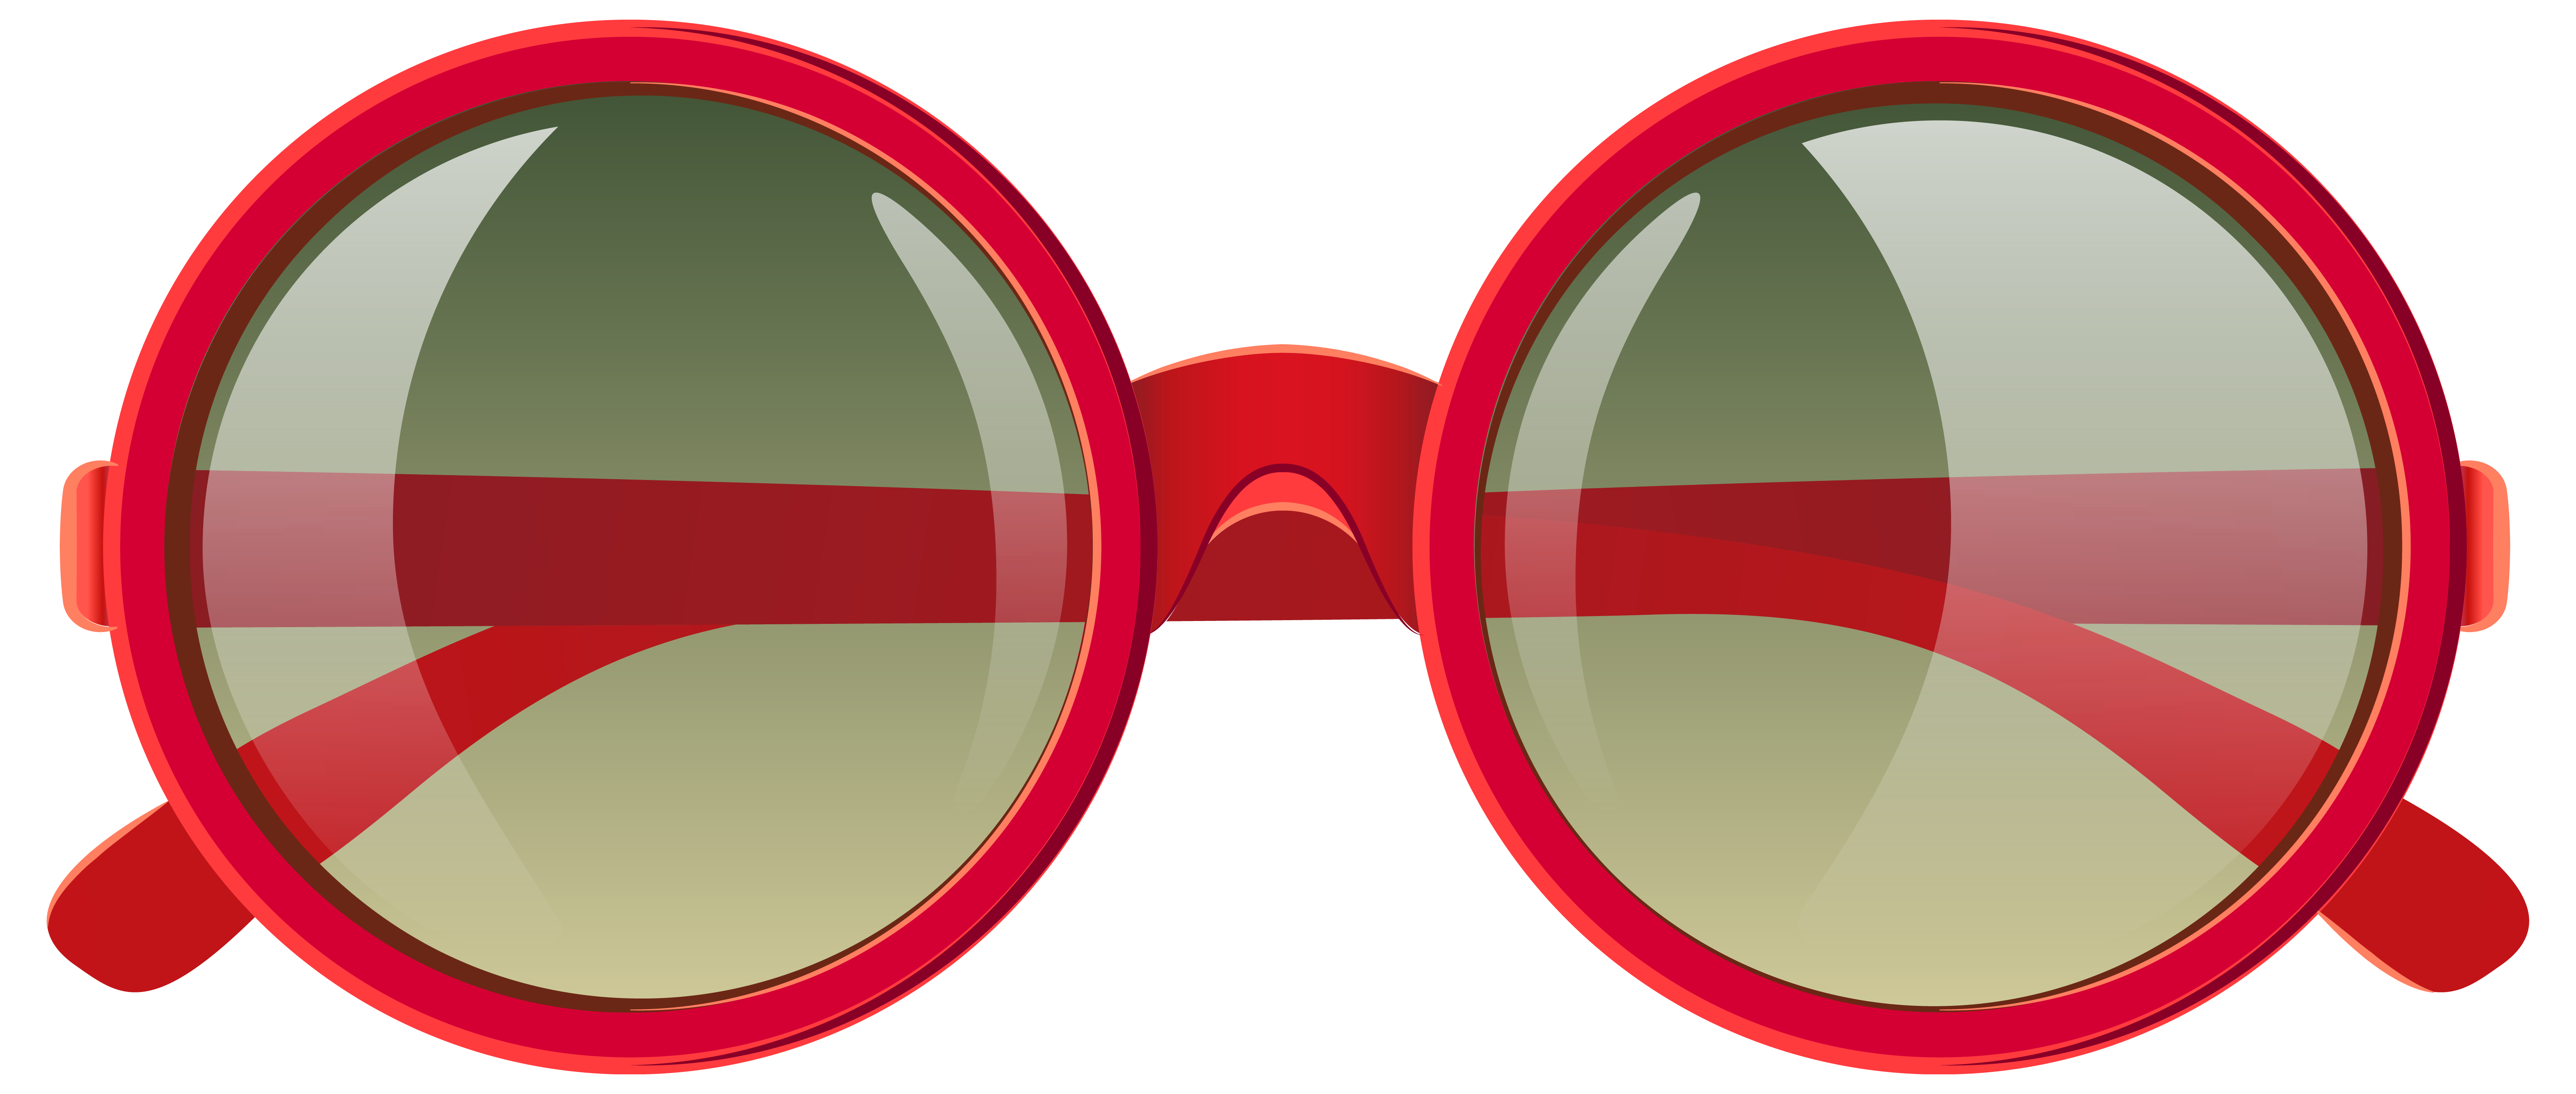 Clipart glasses safety. Cute red sunglasses png